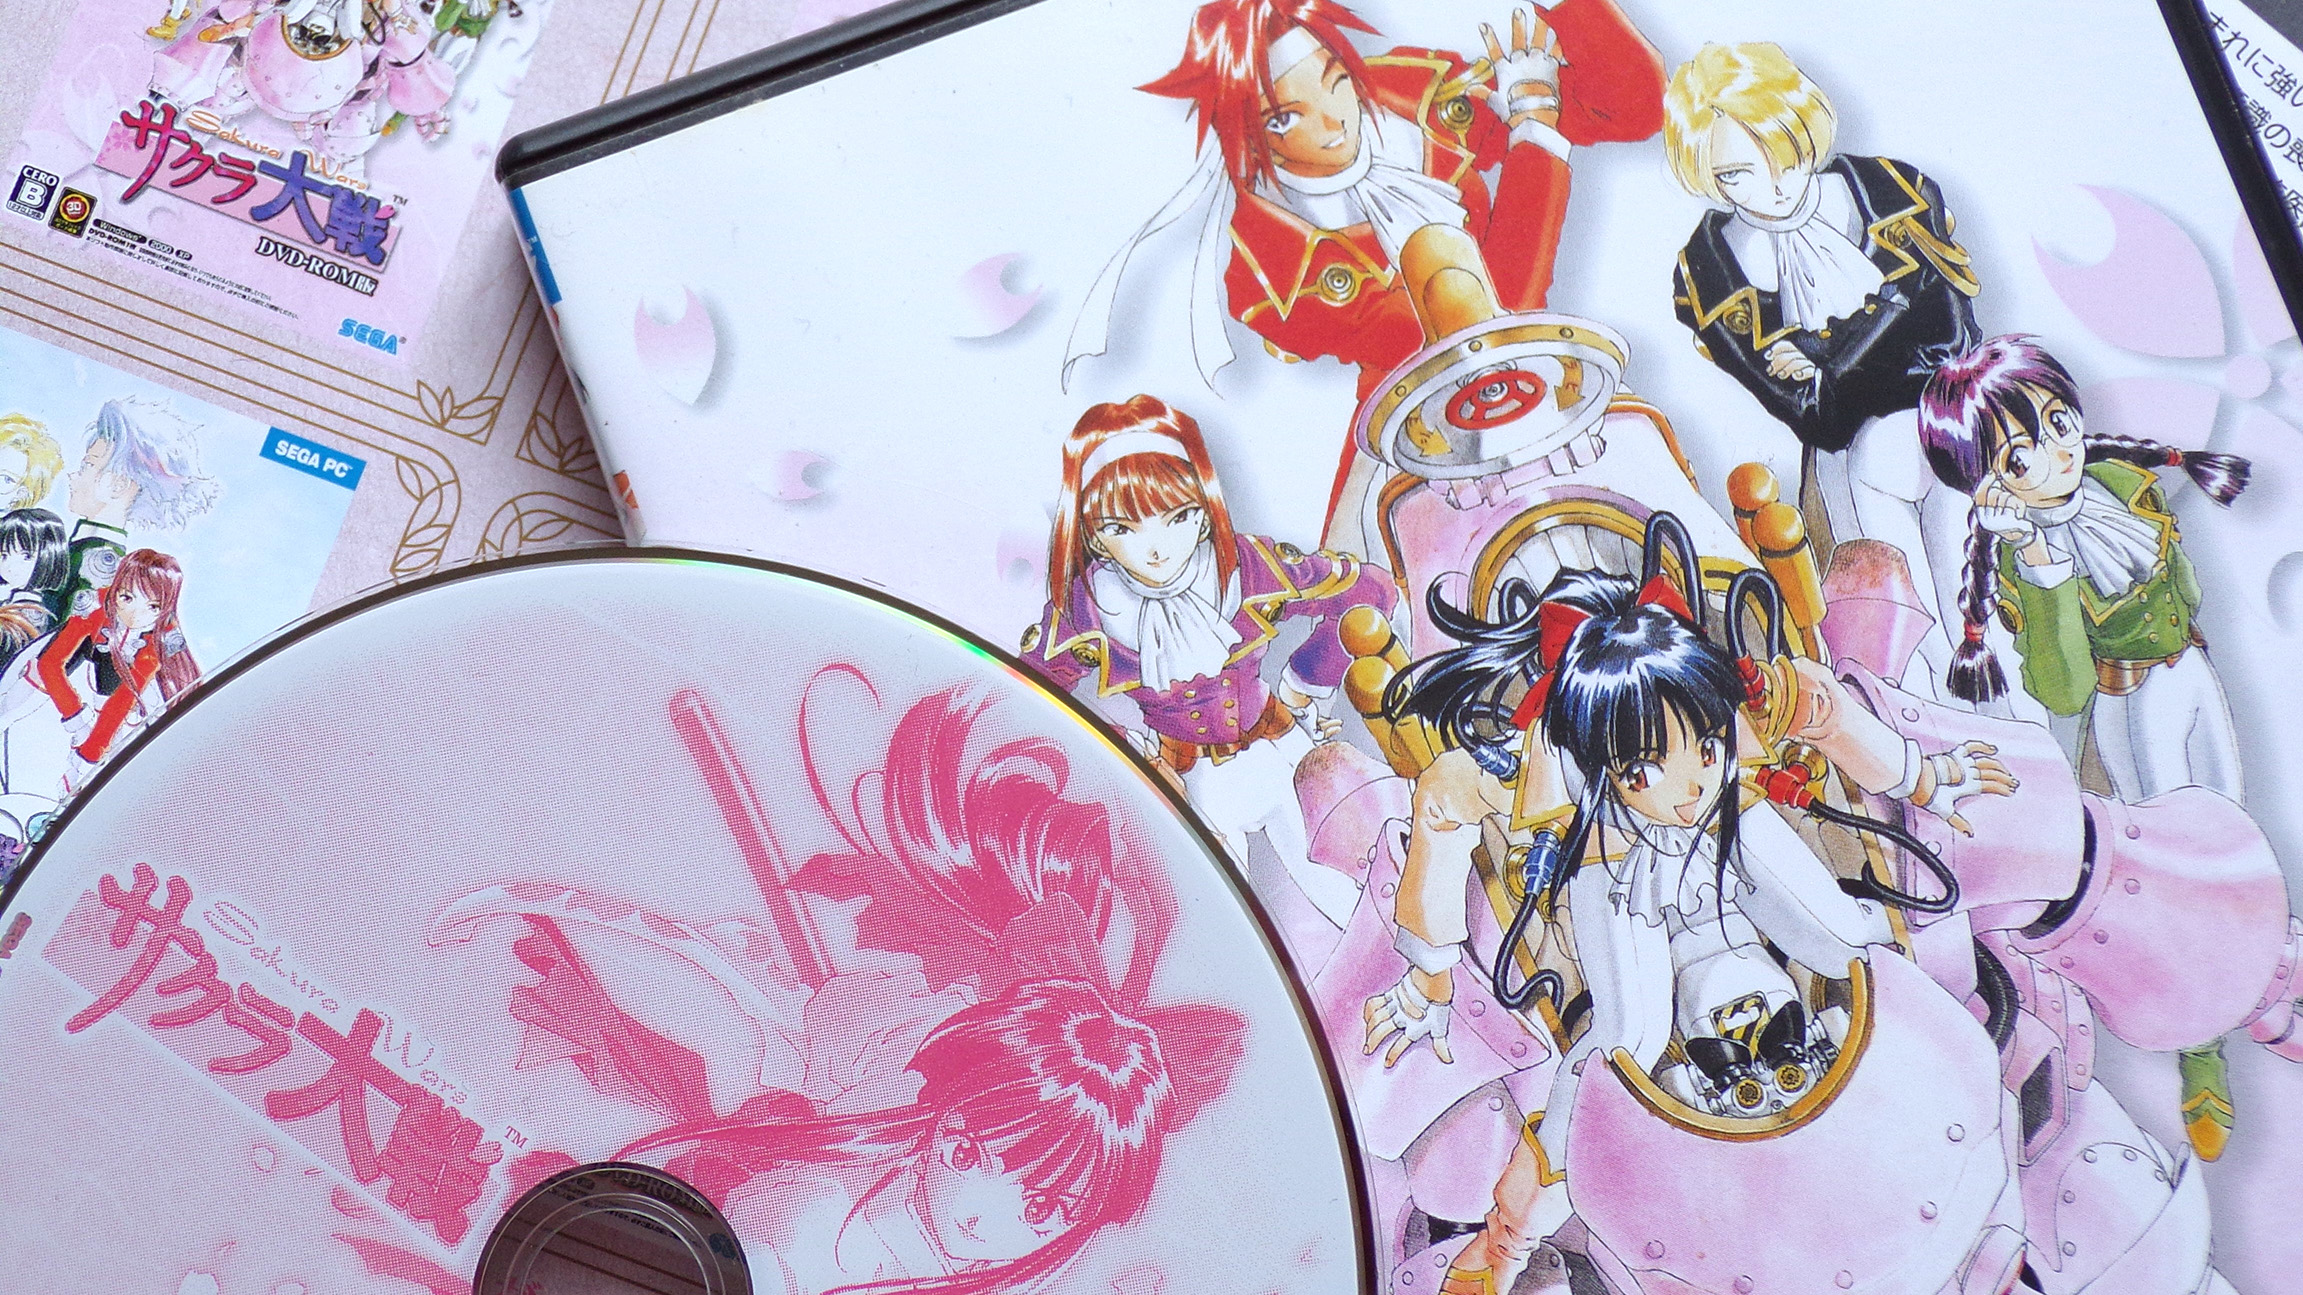  24 years after its forgotten PC debut, it's past time for Sega's Sakura Wars to get its due 